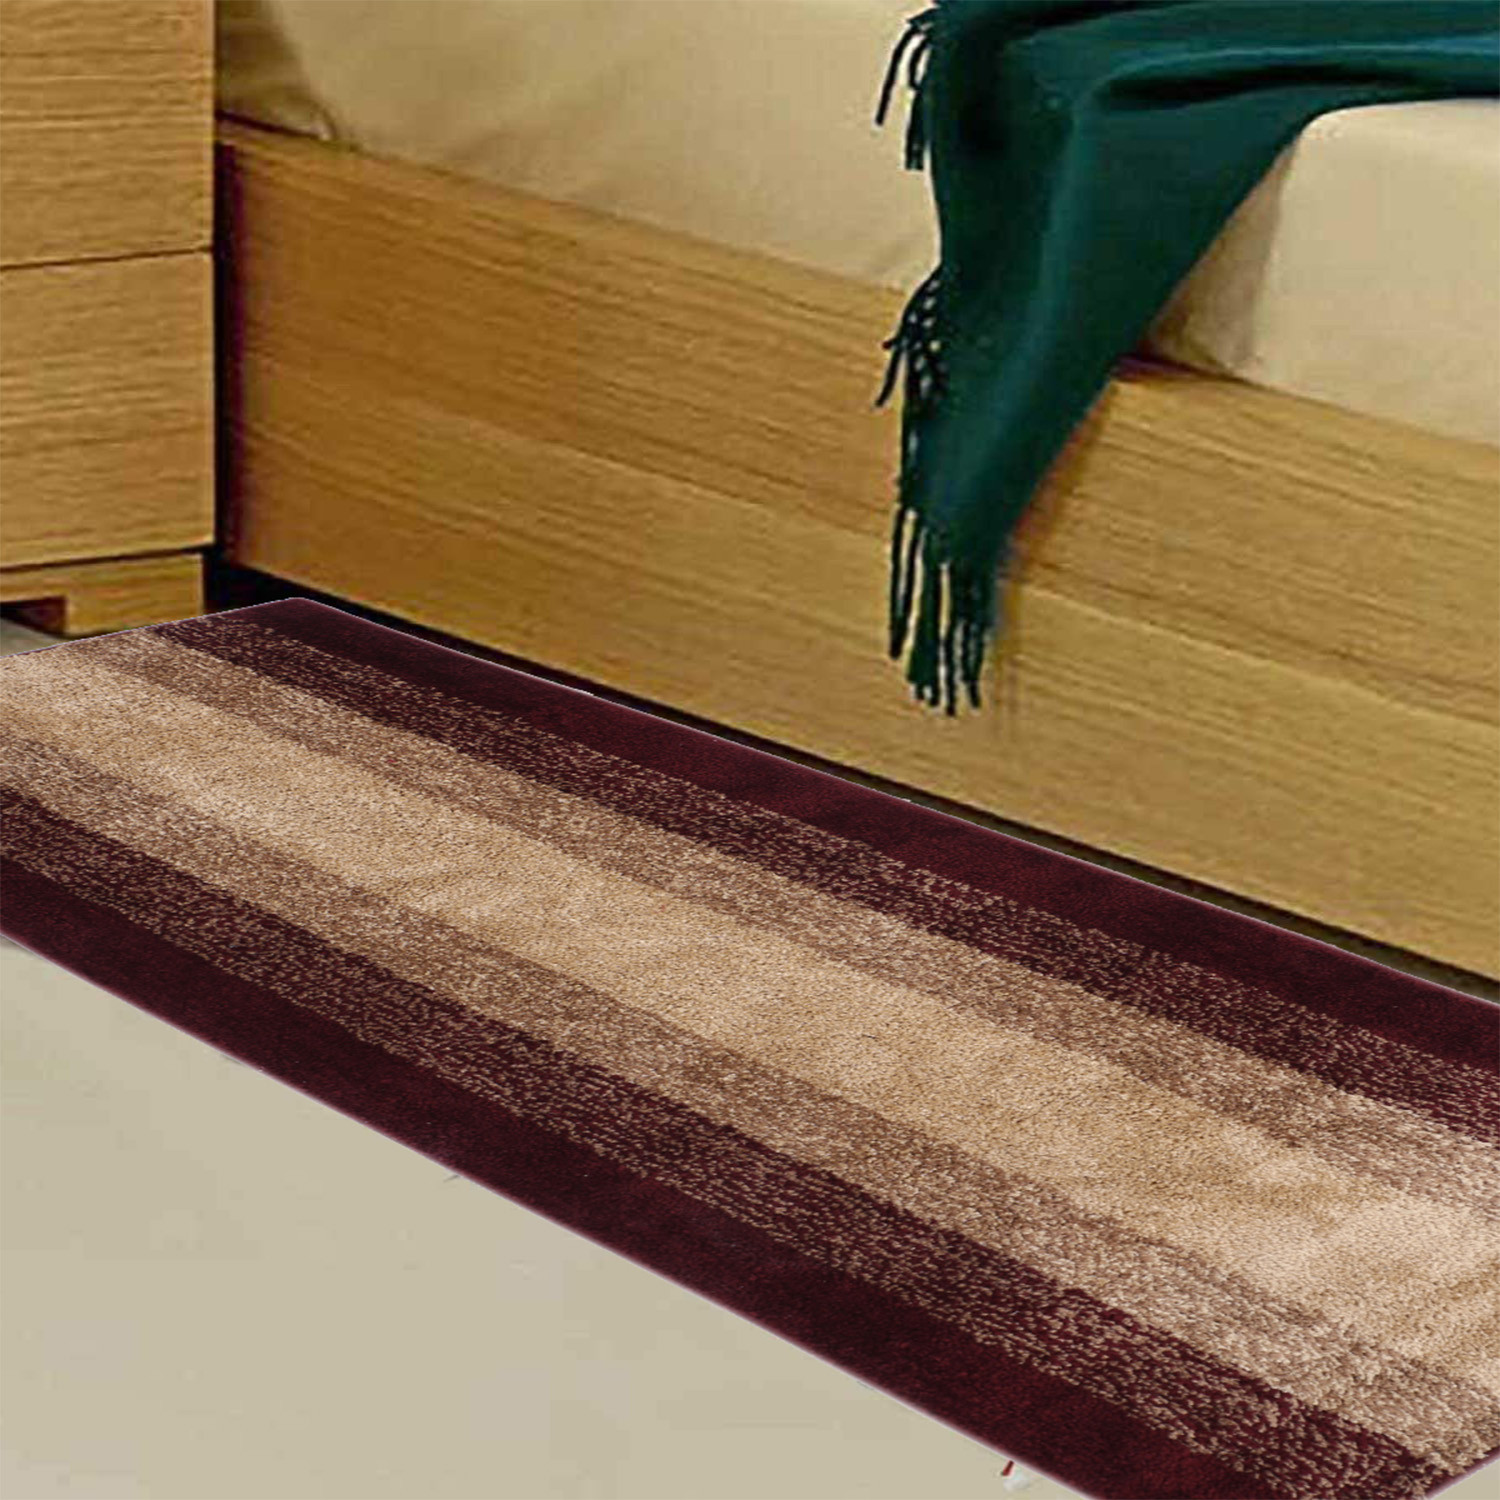 Kuber Industries Shaggy Carpet|Polyester Bedside Runner,Soft Rug For Hall,Offices,Kitchens,Bedroom,Floor Home Décor,5 x 2 Ft.(Maroon)